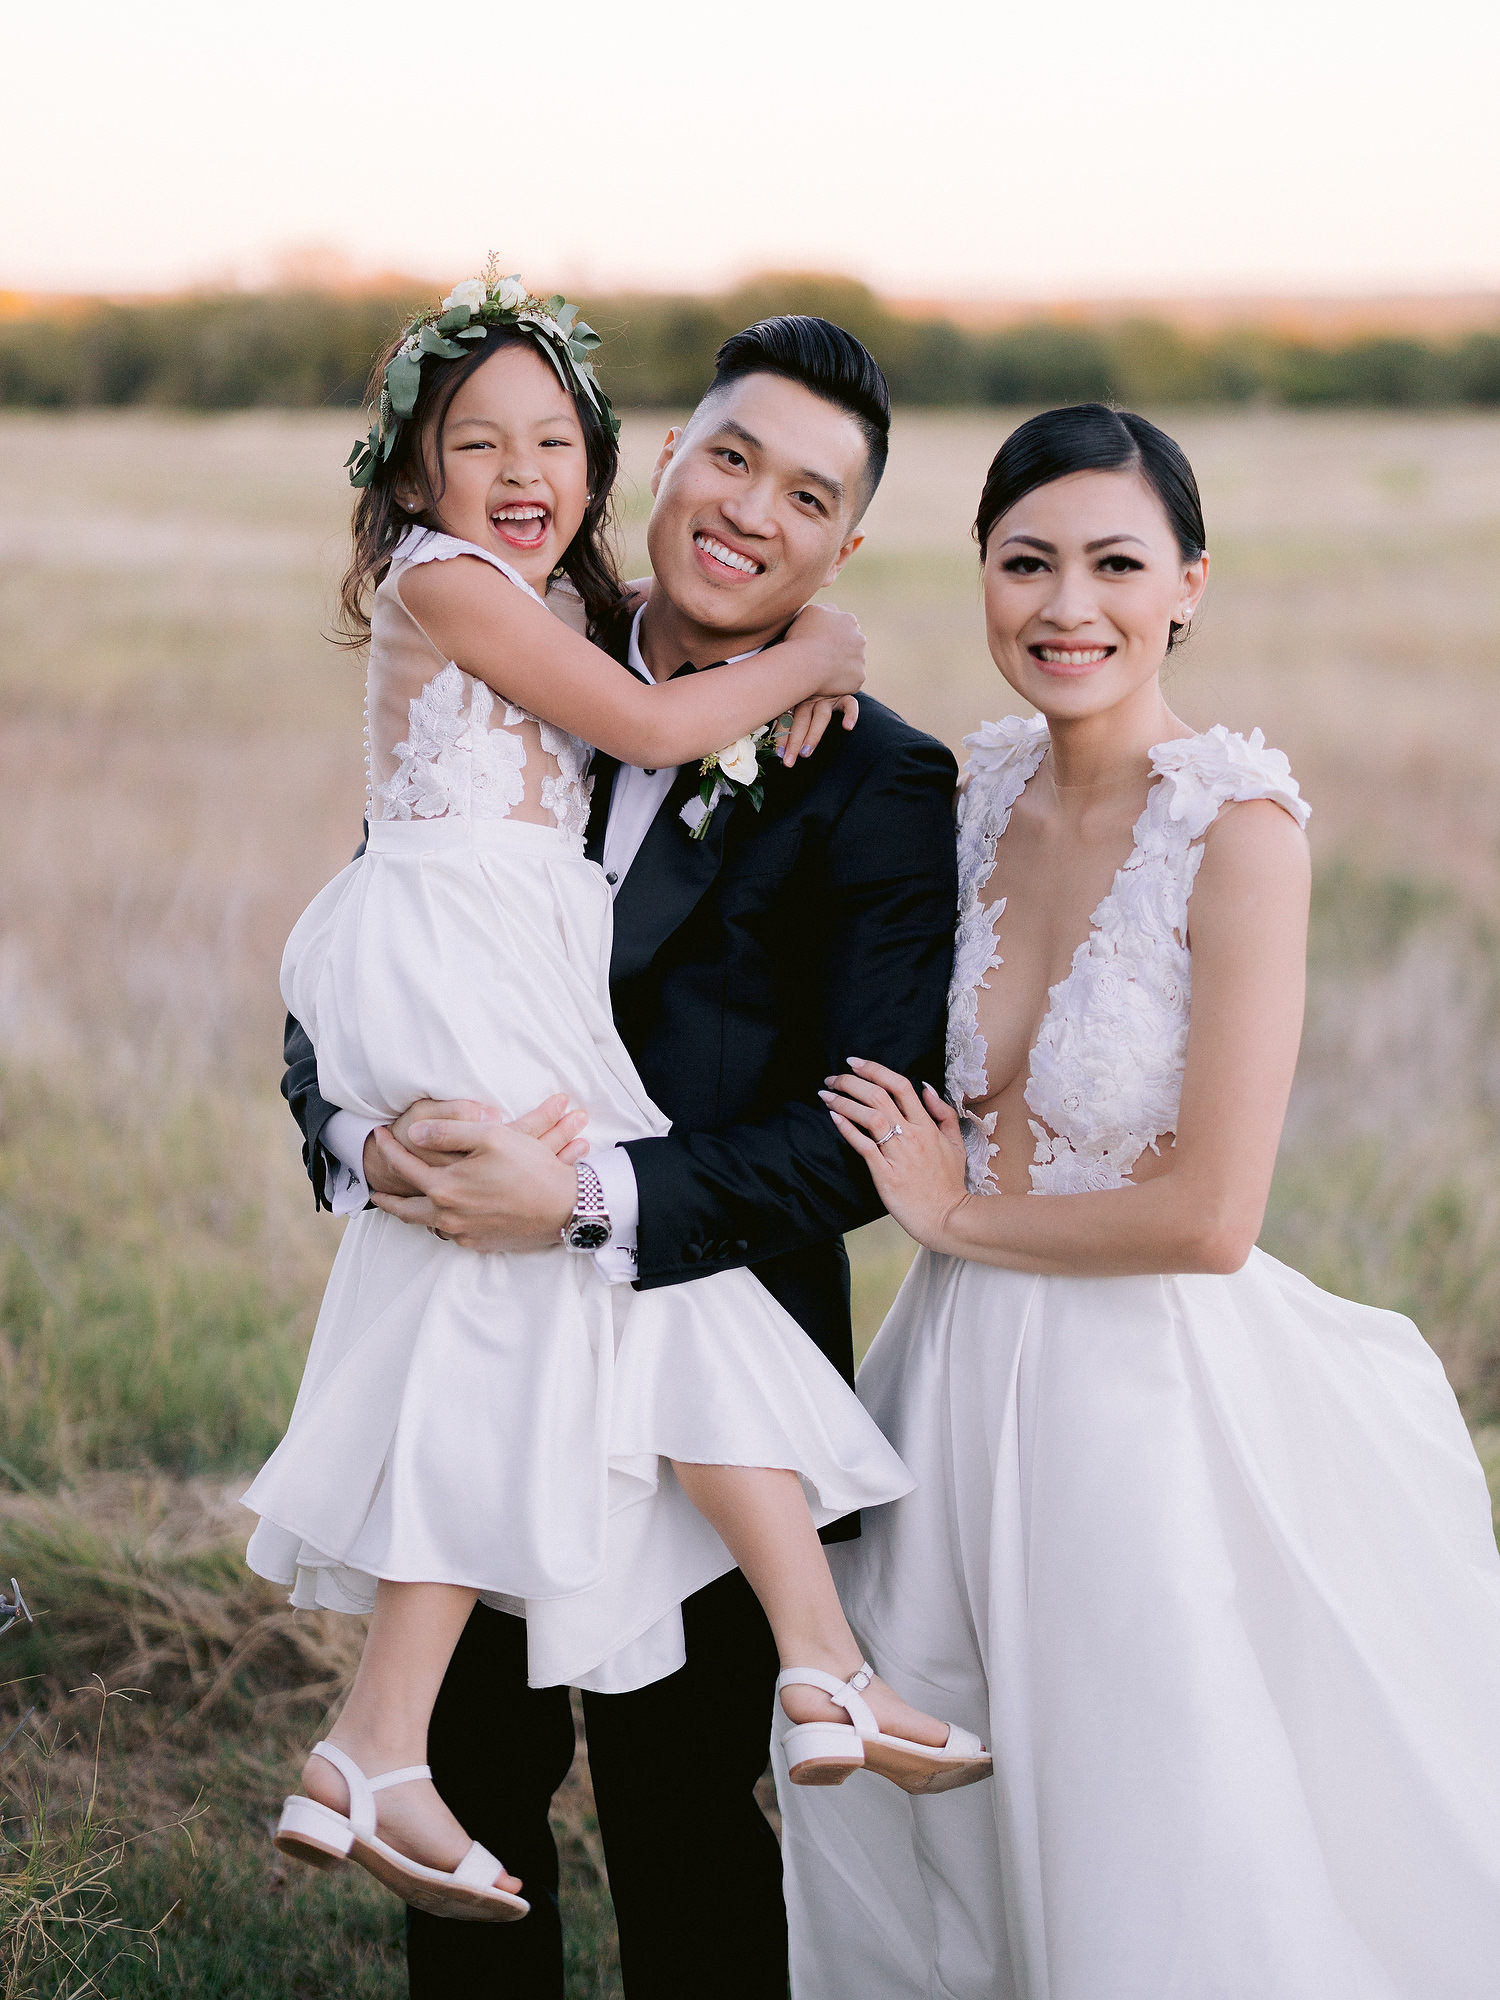 Bride, groom, and daughter on wedding day